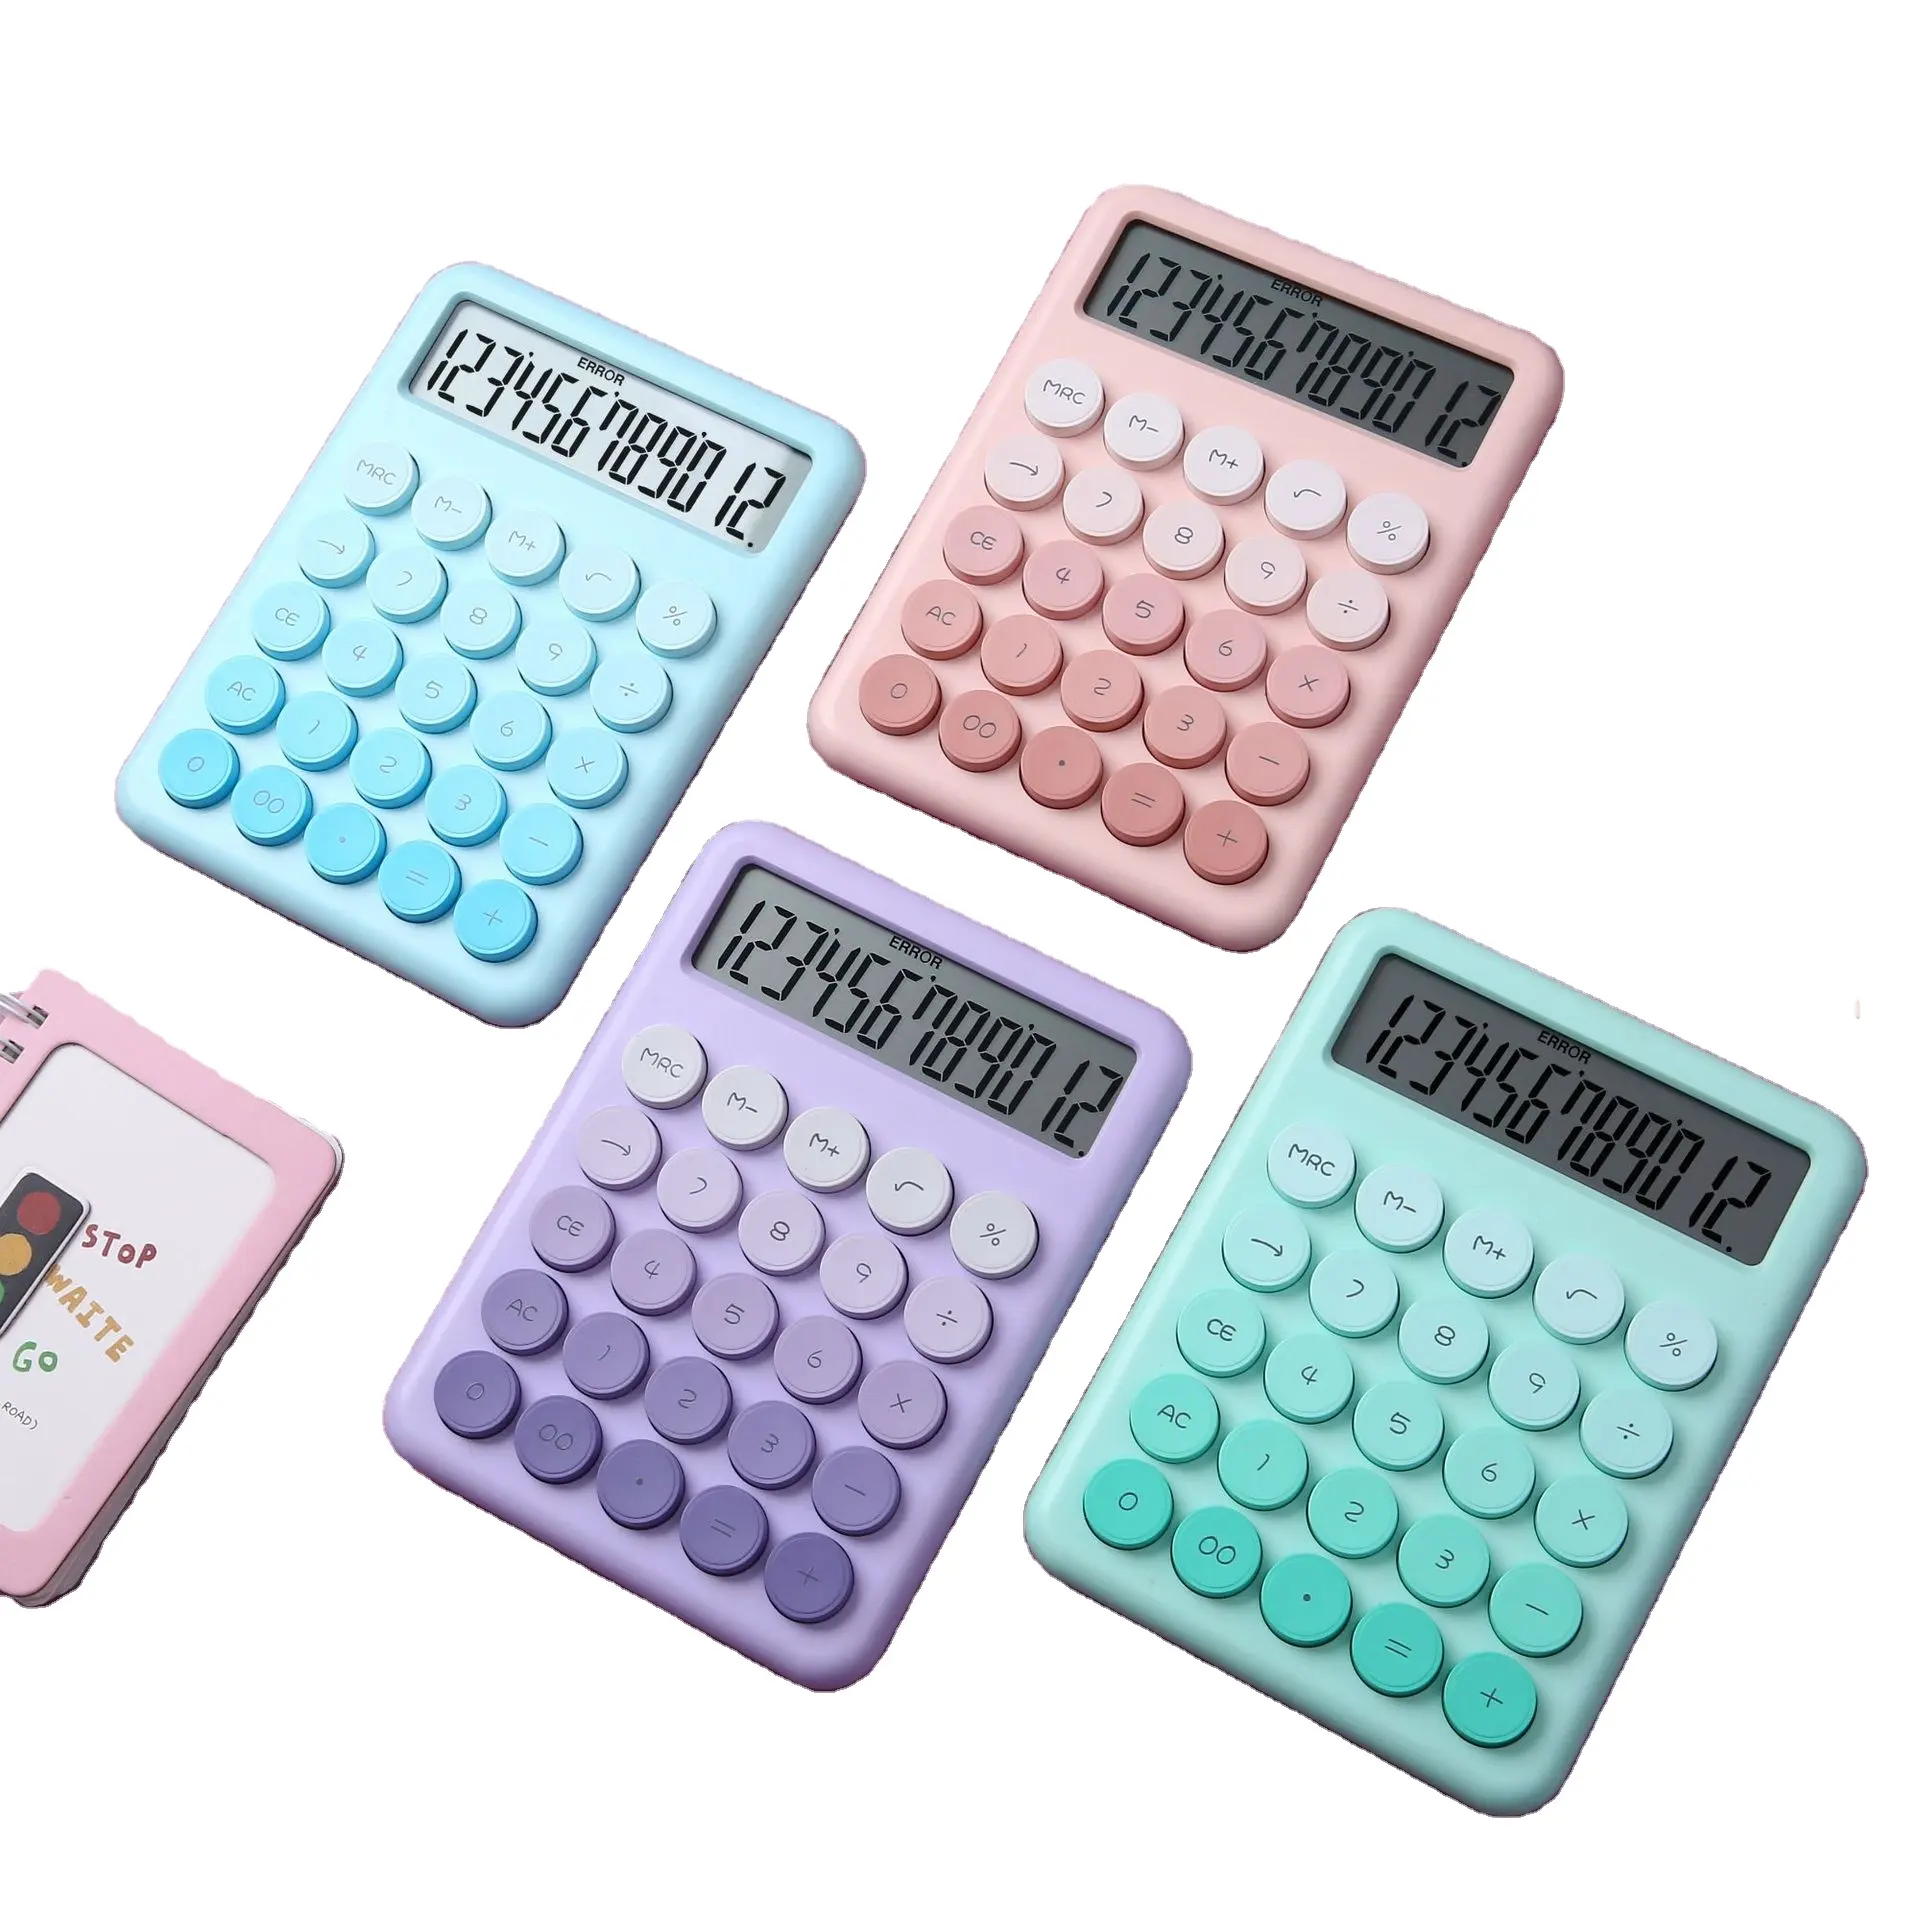 Cute Colorful Candy Portable Desk Calculator Typewriter-Inspired Mechanical Key Large Screen Round Button